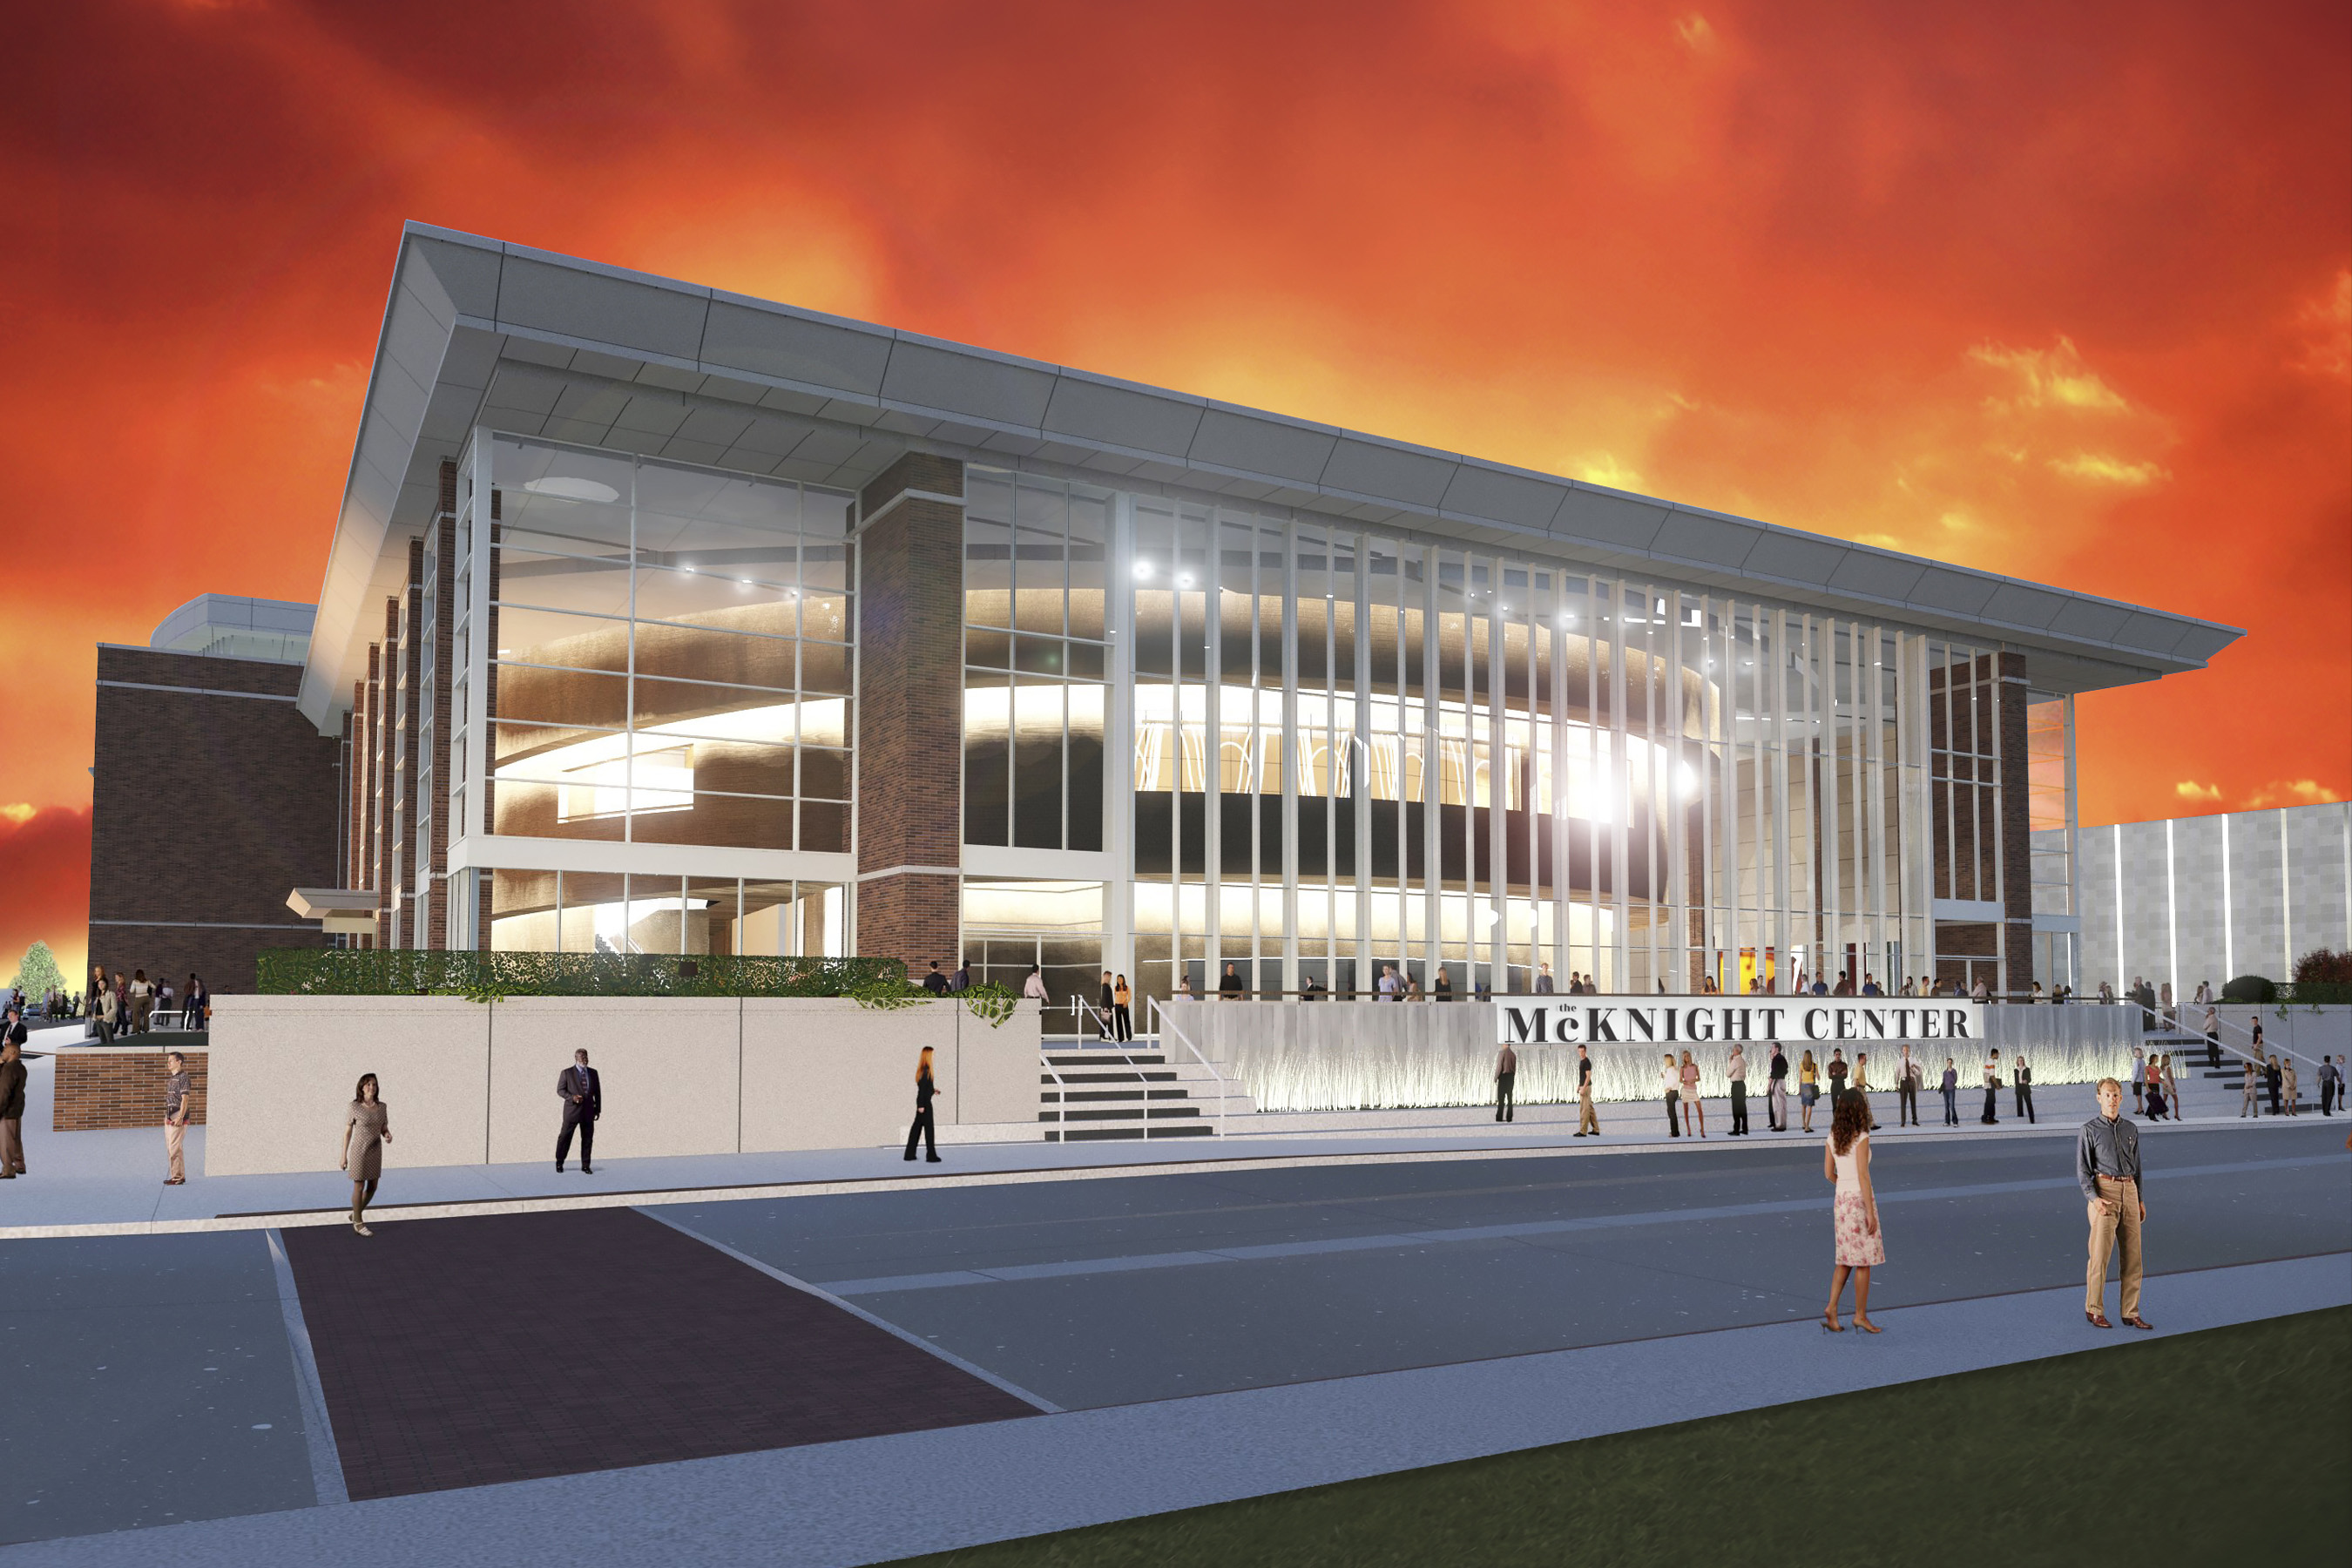 Architectural rendering of the front façade of The McKnight Center for the Performing Arts at Oklahoma State University